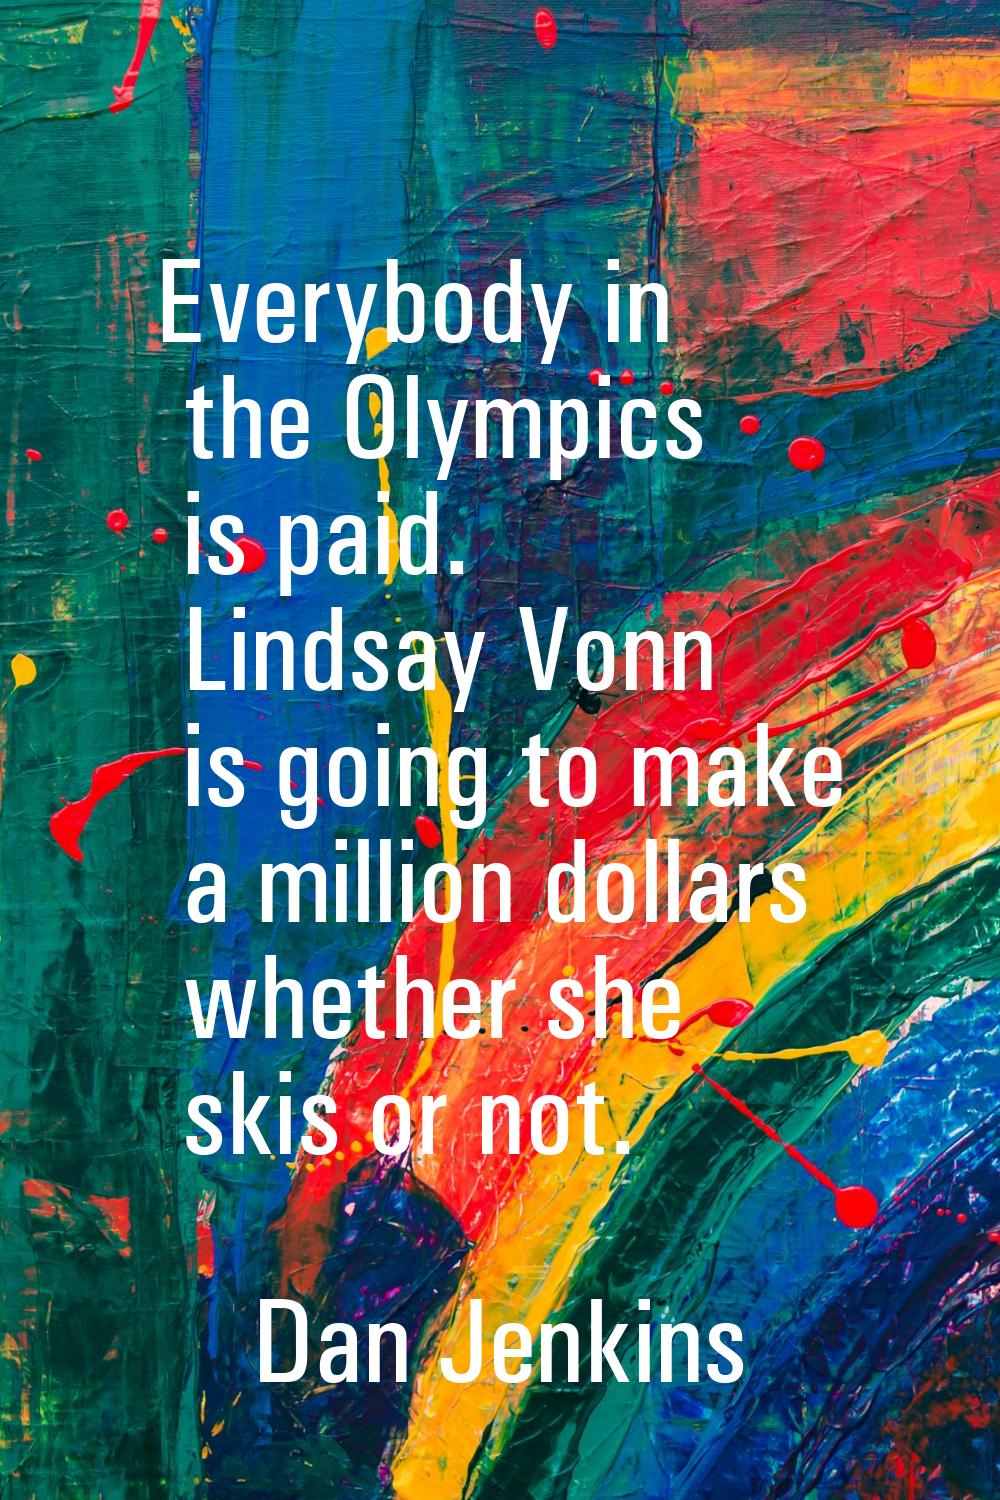 Everybody in the Olympics is paid. Lindsay Vonn is going to make a million dollars whether she skis